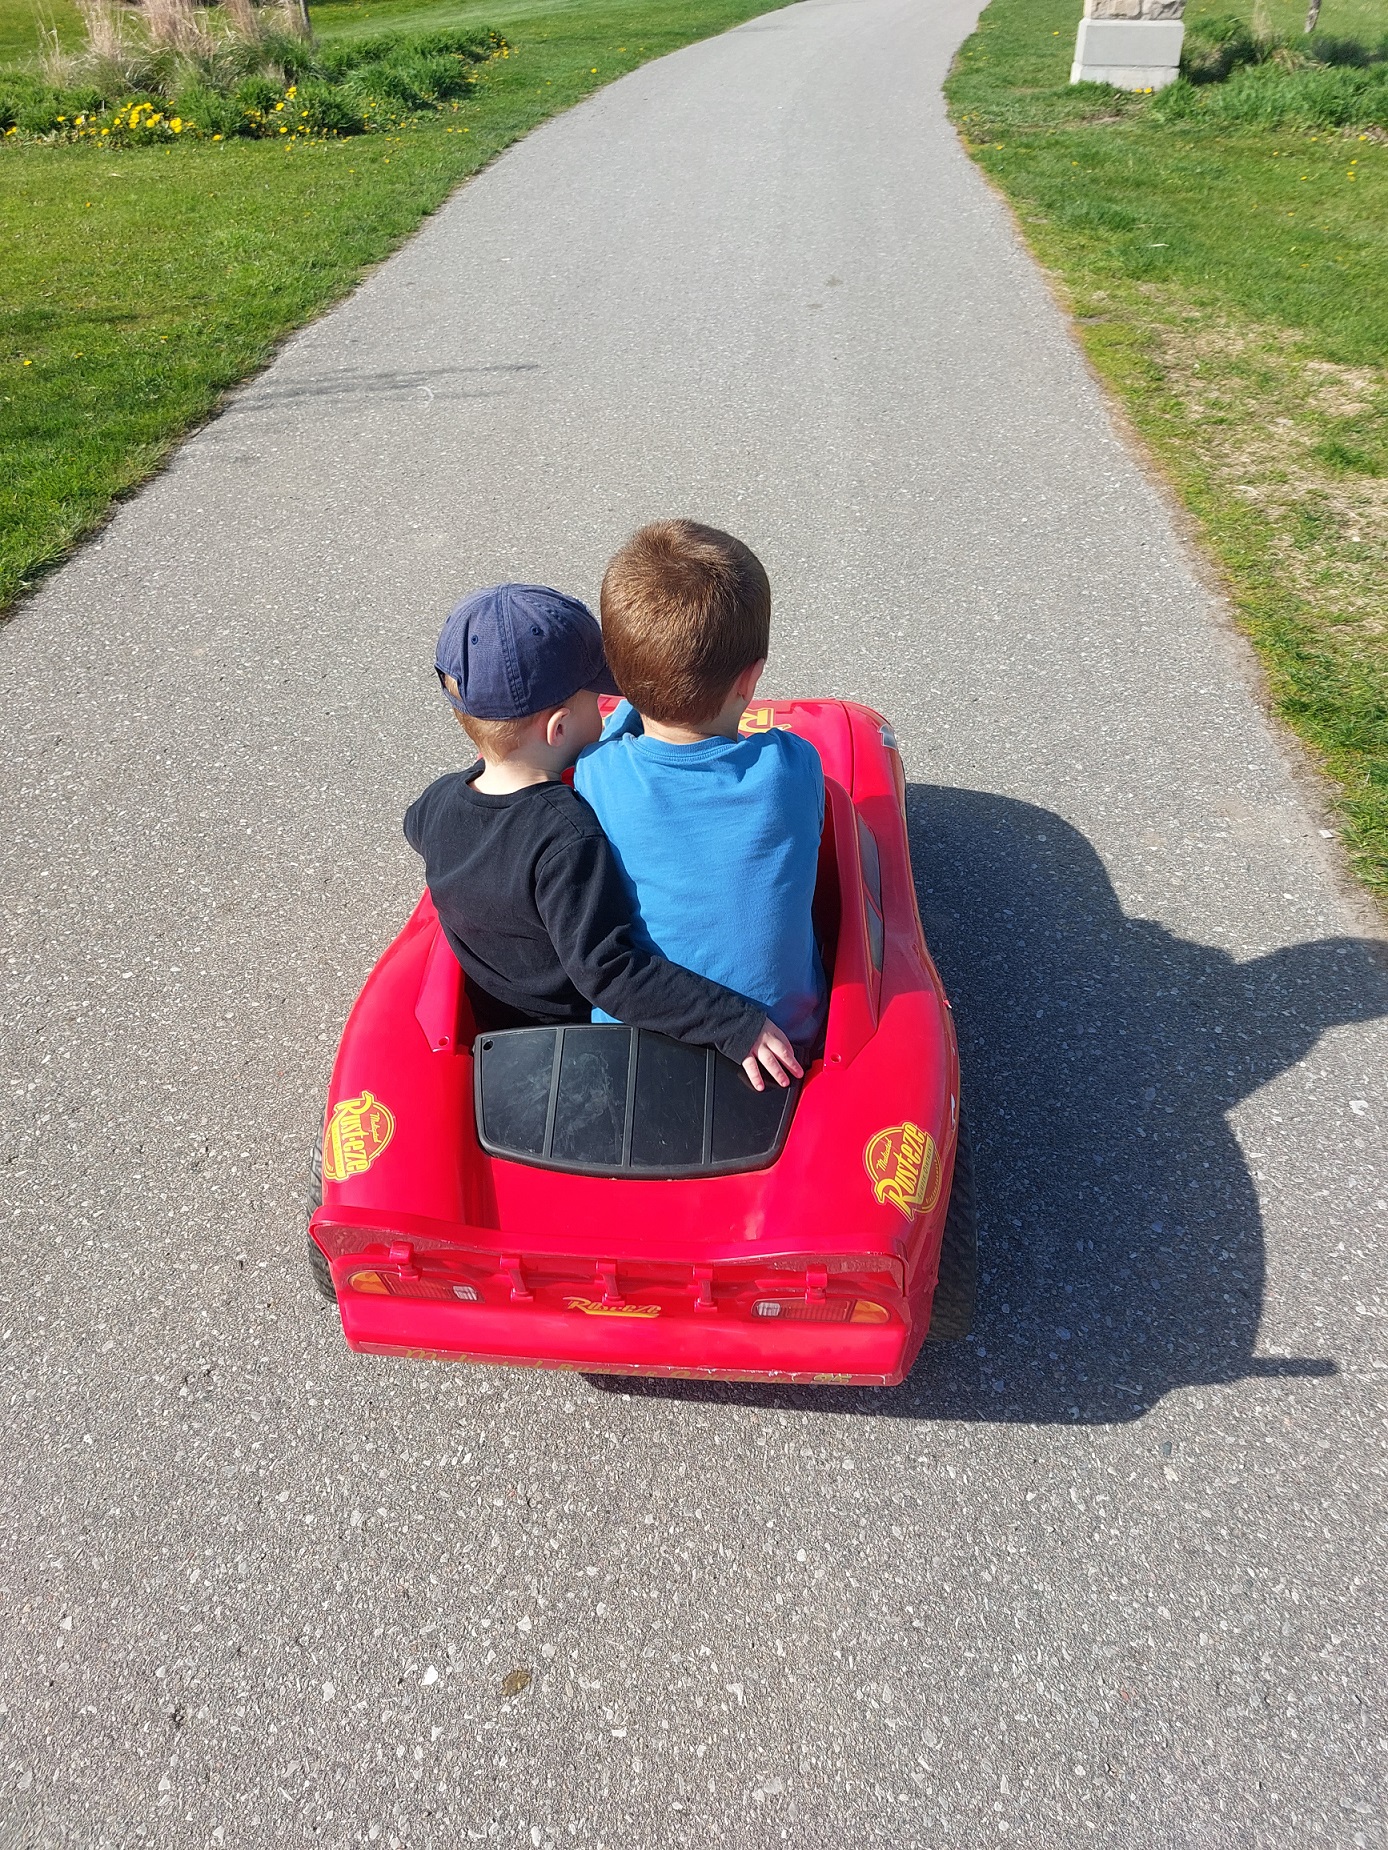 Christine Gray's sons, riding in a red car